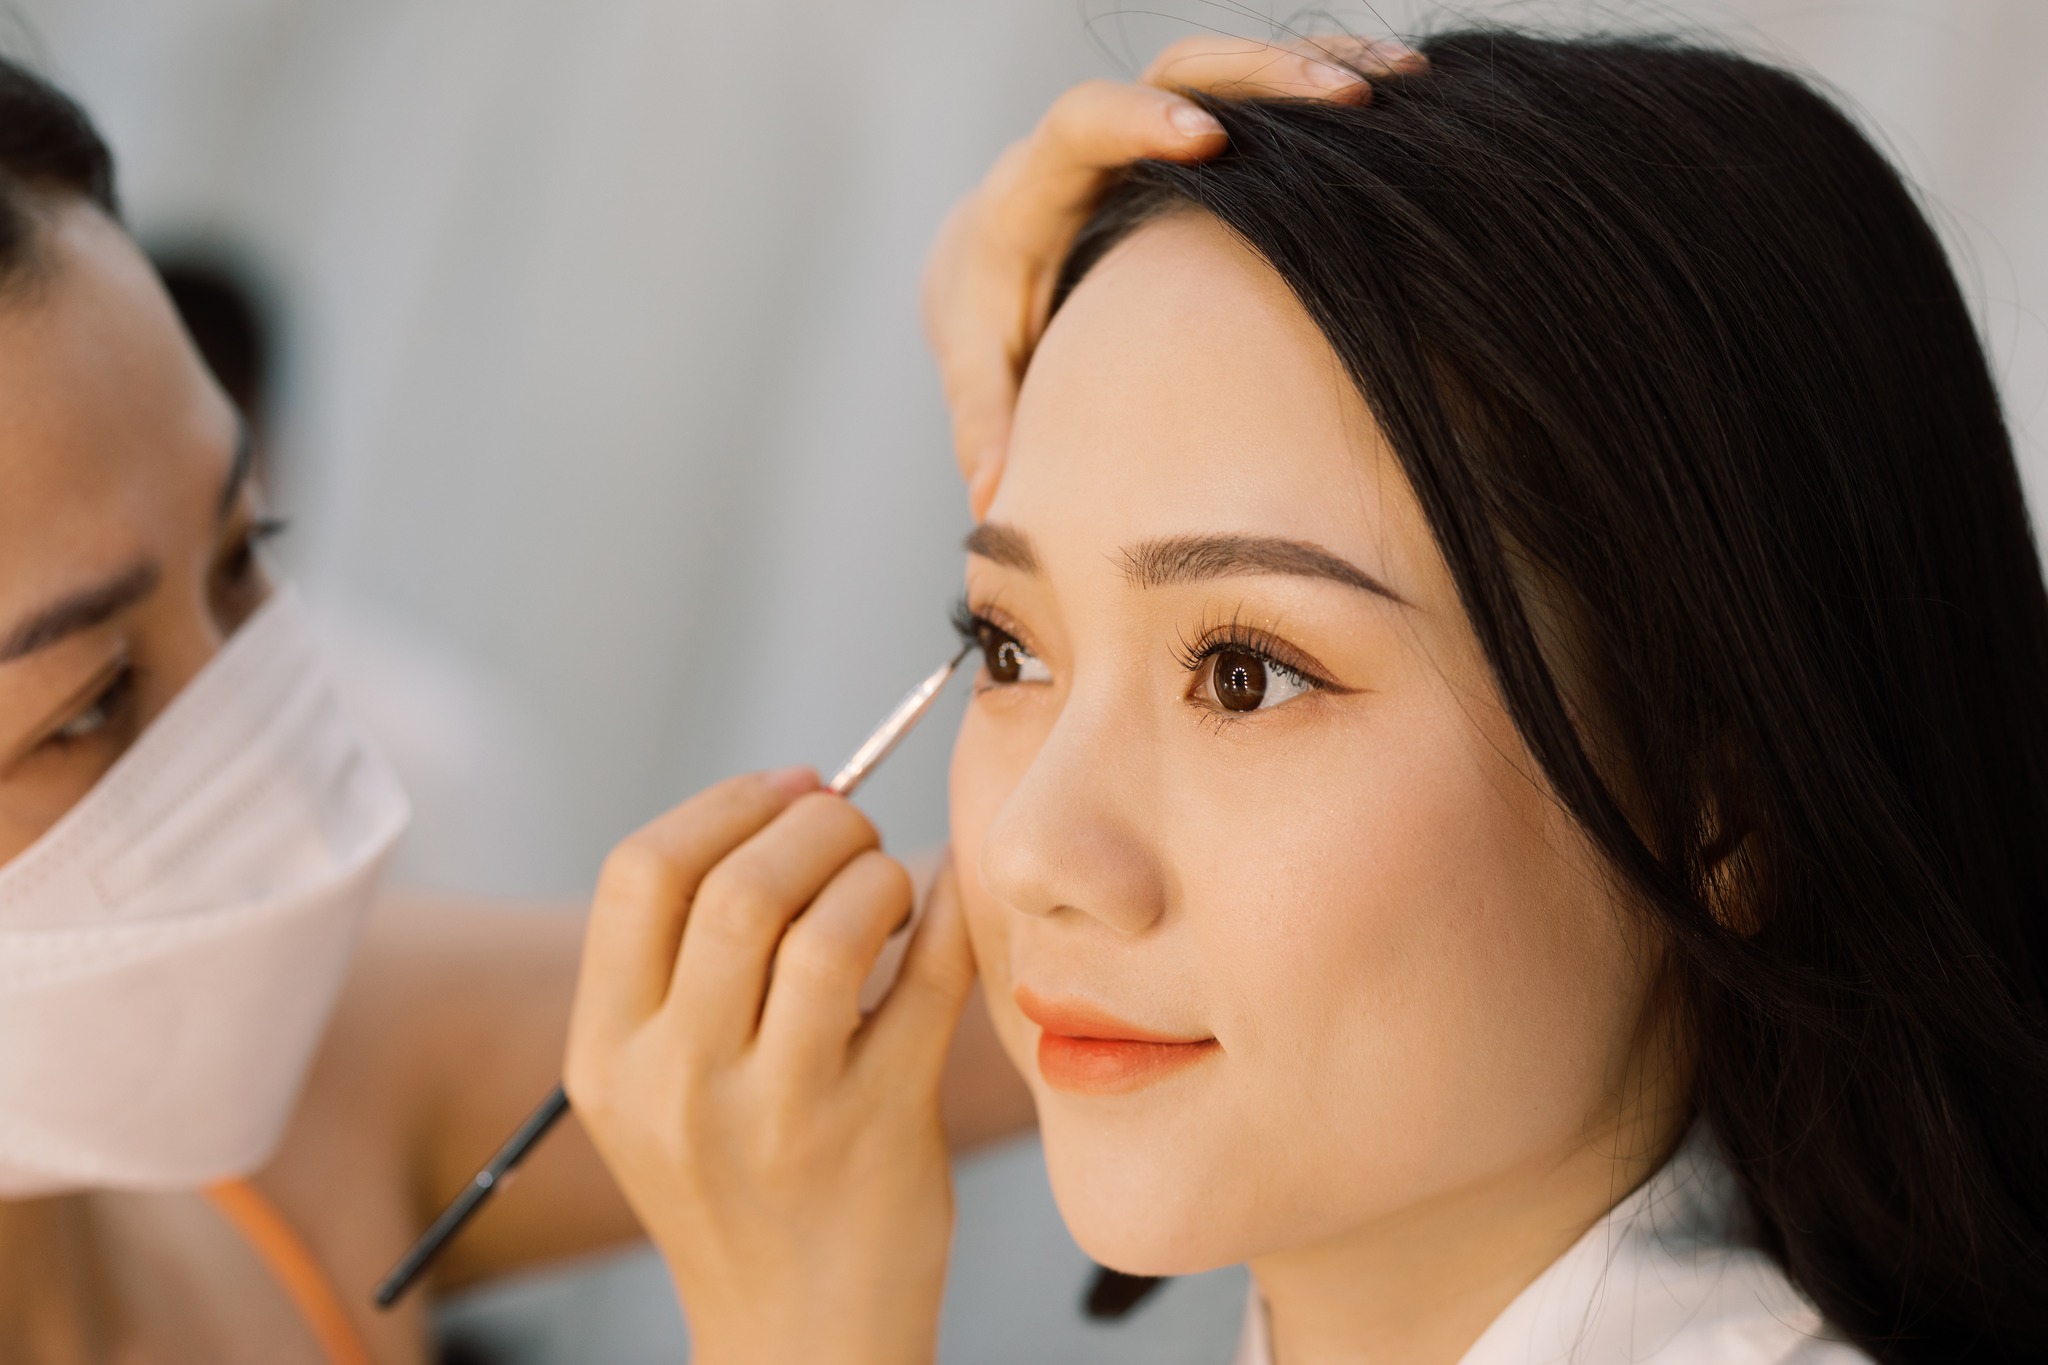 Make-up layouts by Dee Wedding lead the trend in Da Nang 